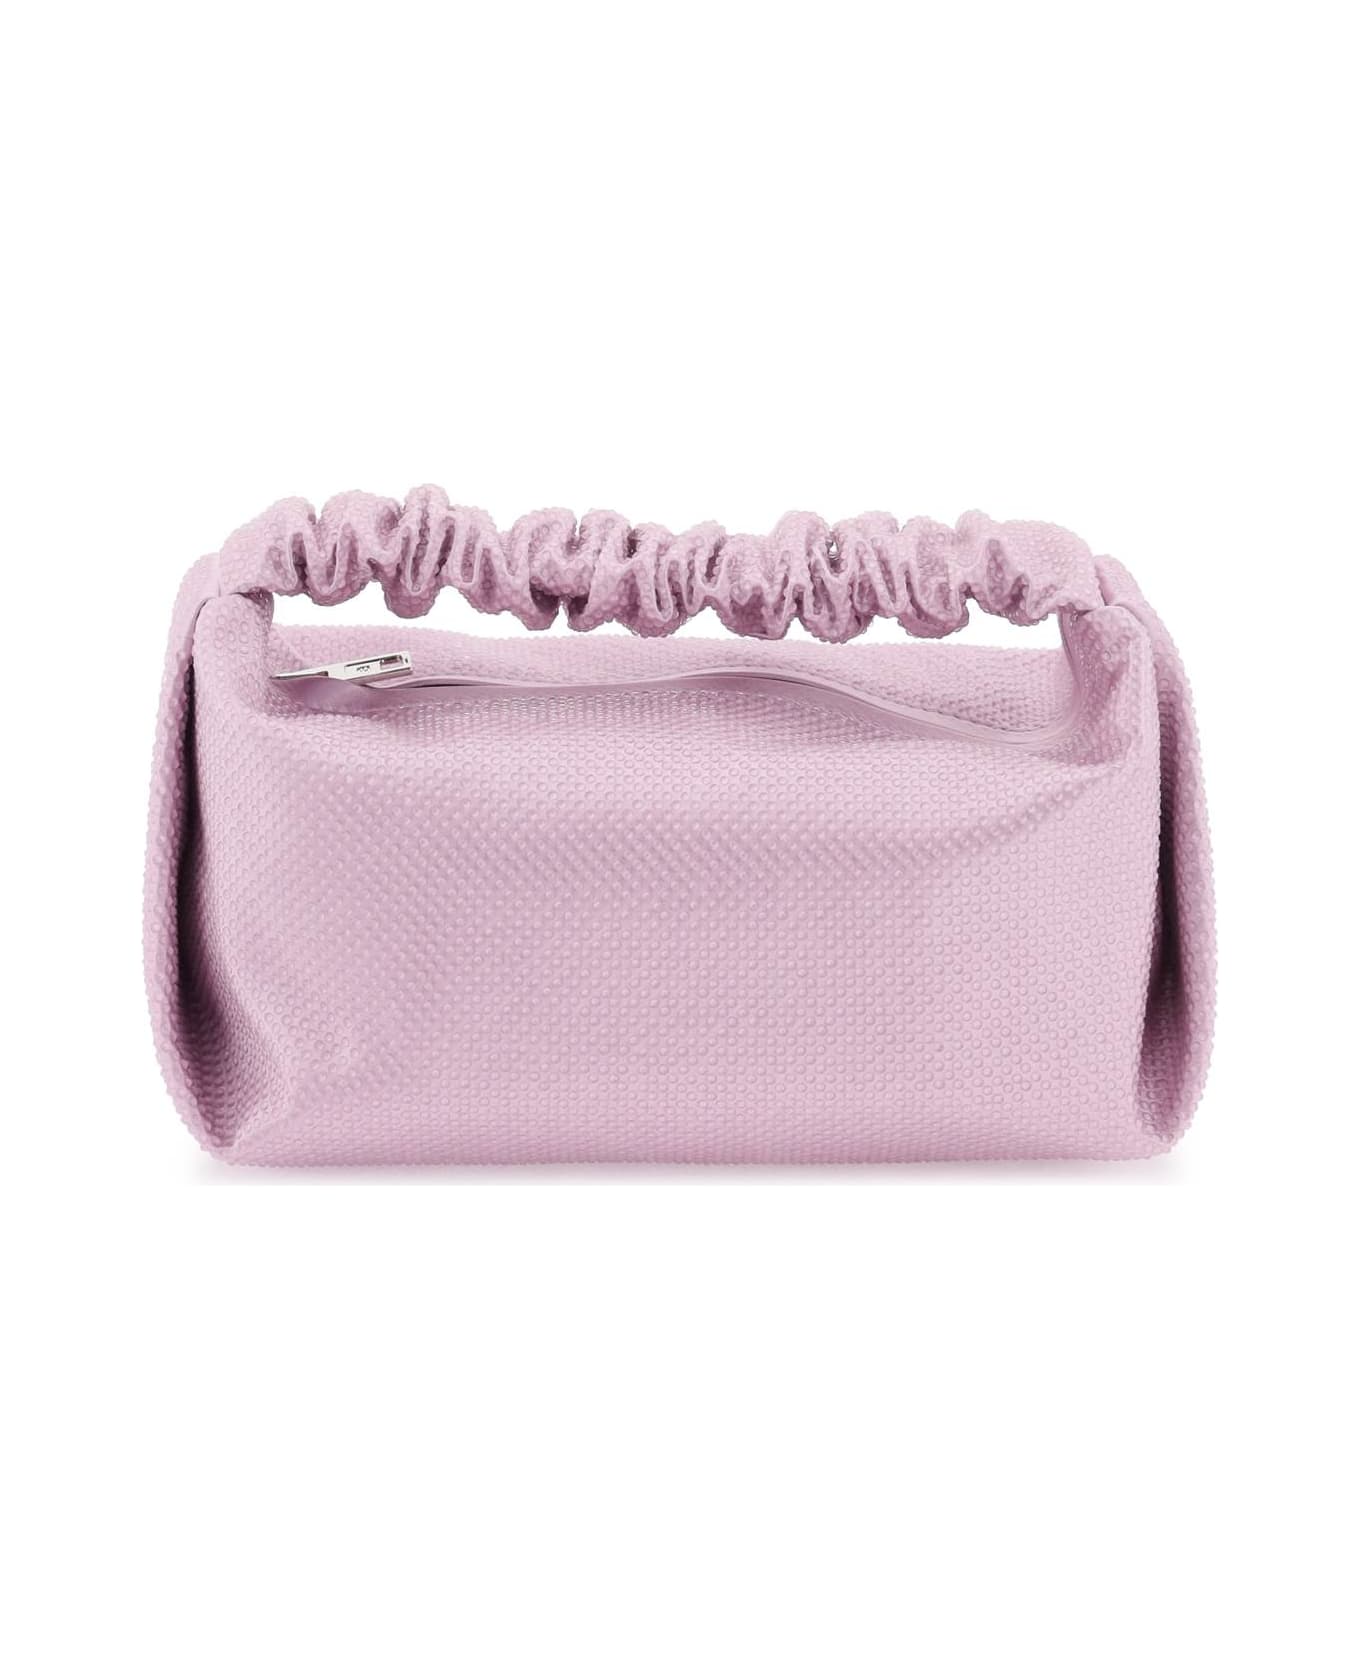 Alexander Wang Scrunchie Mini Bag With Crystals - Windsome Orchid クラッチバッグ